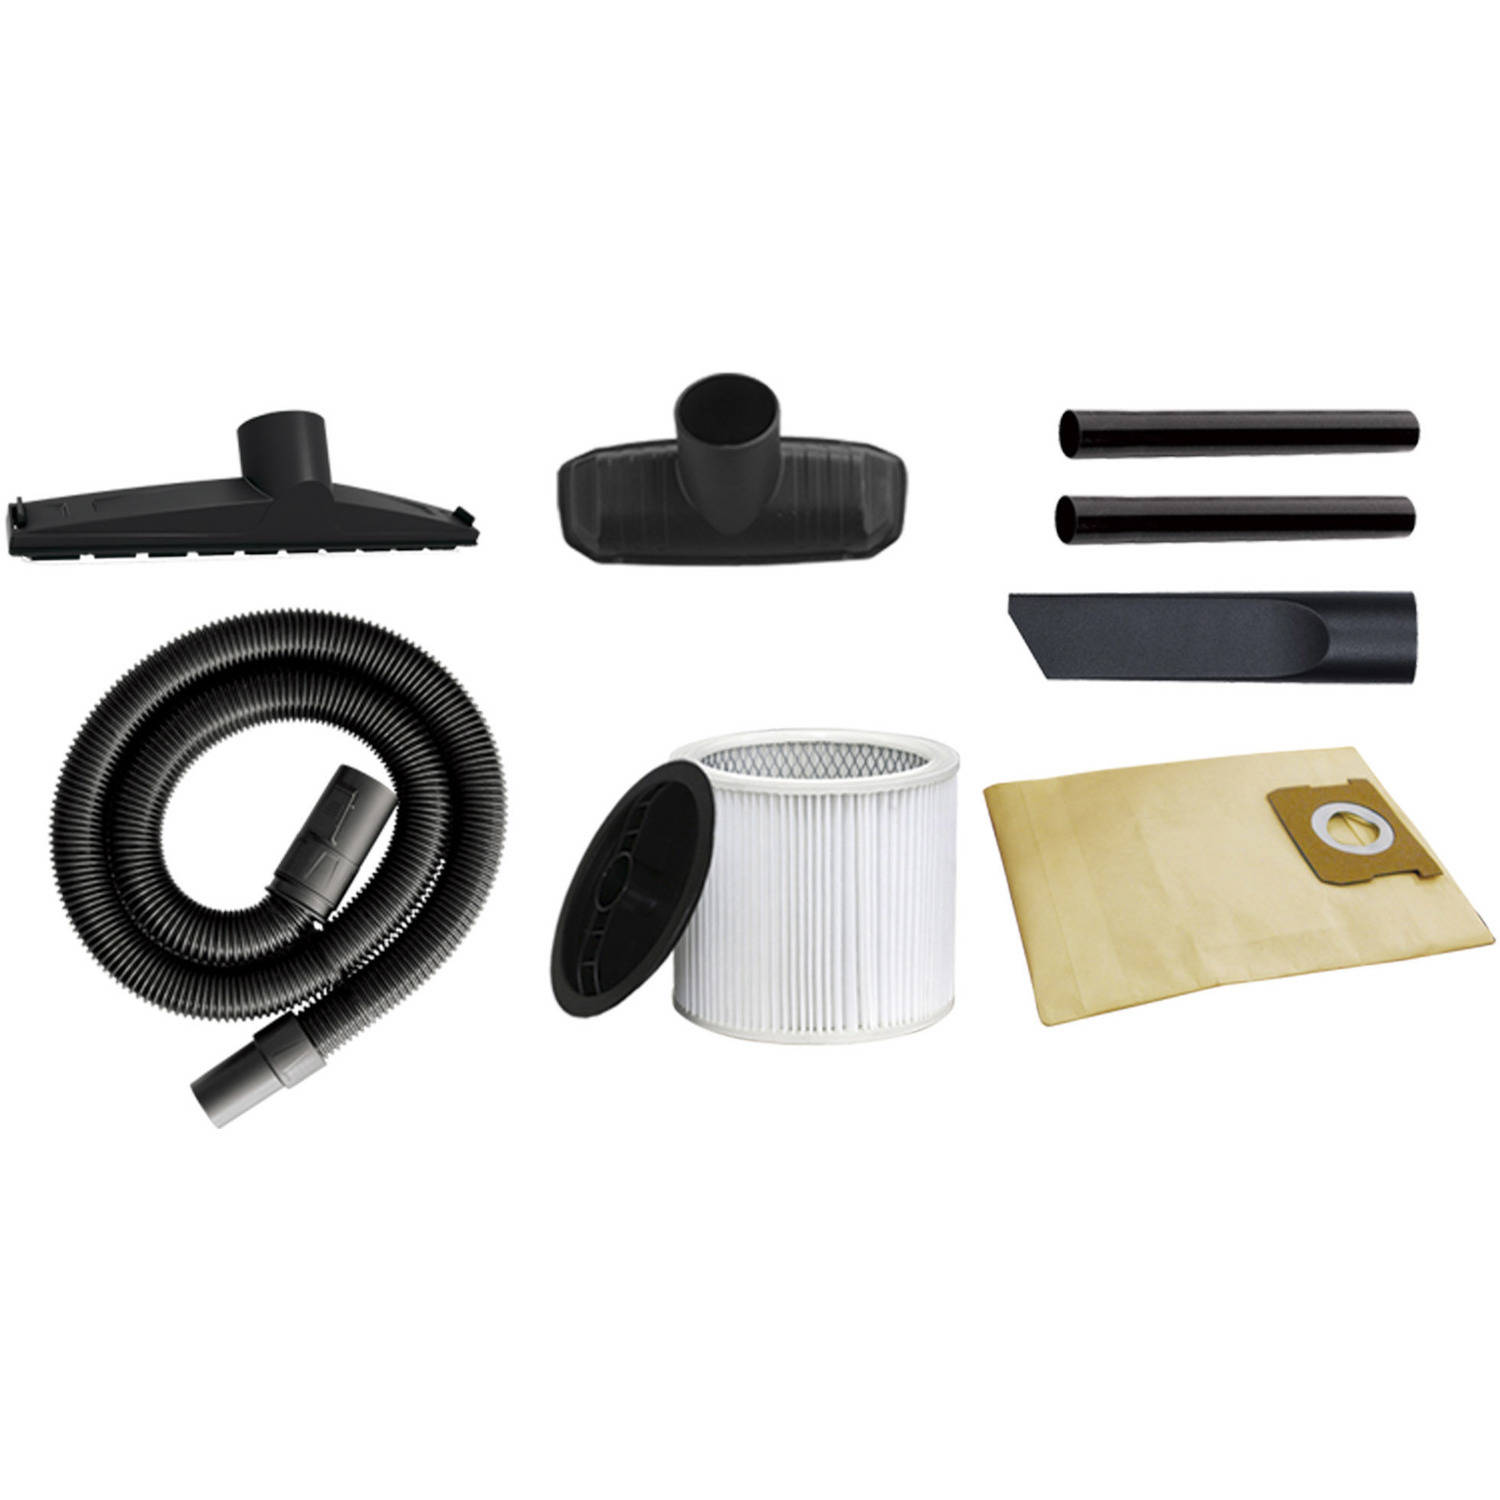 STANLEY 8 gal Stainless Steel Wet Dry Vacuum with Hose Accessories and Tool Storage - image 4 of 7